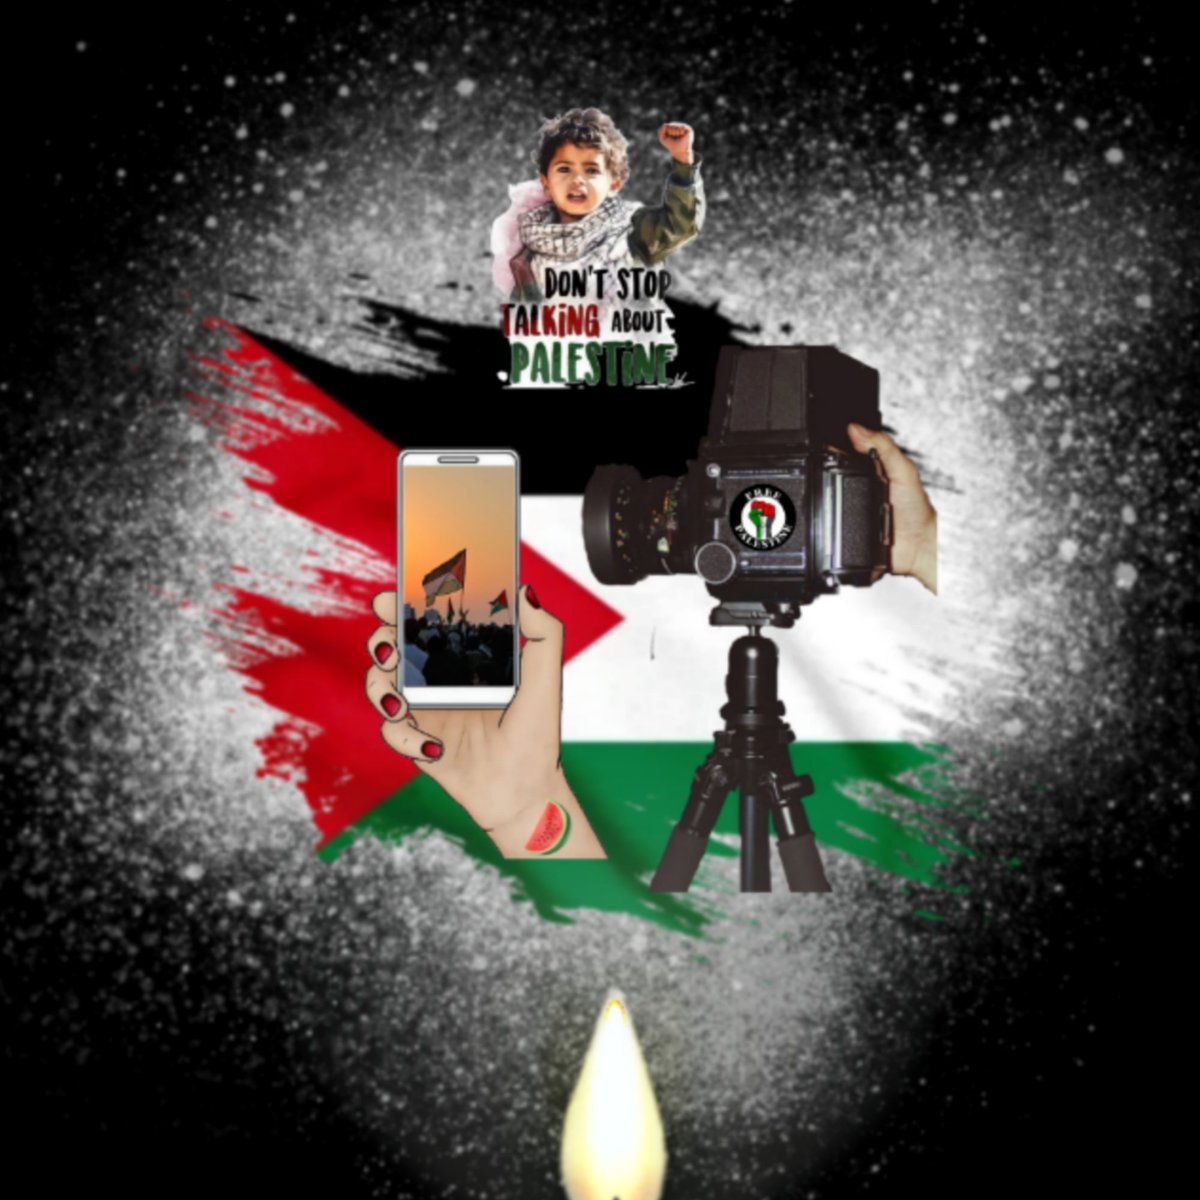 In the darkness bring light to the world like the flame of a candle.
#FreePalestine
#FreeSudan
#FreeCongo
#FreeTigray
#EndGenocide 
#beaflame 
#HolocaustEducation 
#STANDagainstgenocide 
#HumanityForAll 
#freedomforall 
#GazaCeaseFireNow 
#gazapress 
#ChildrenOfGaza